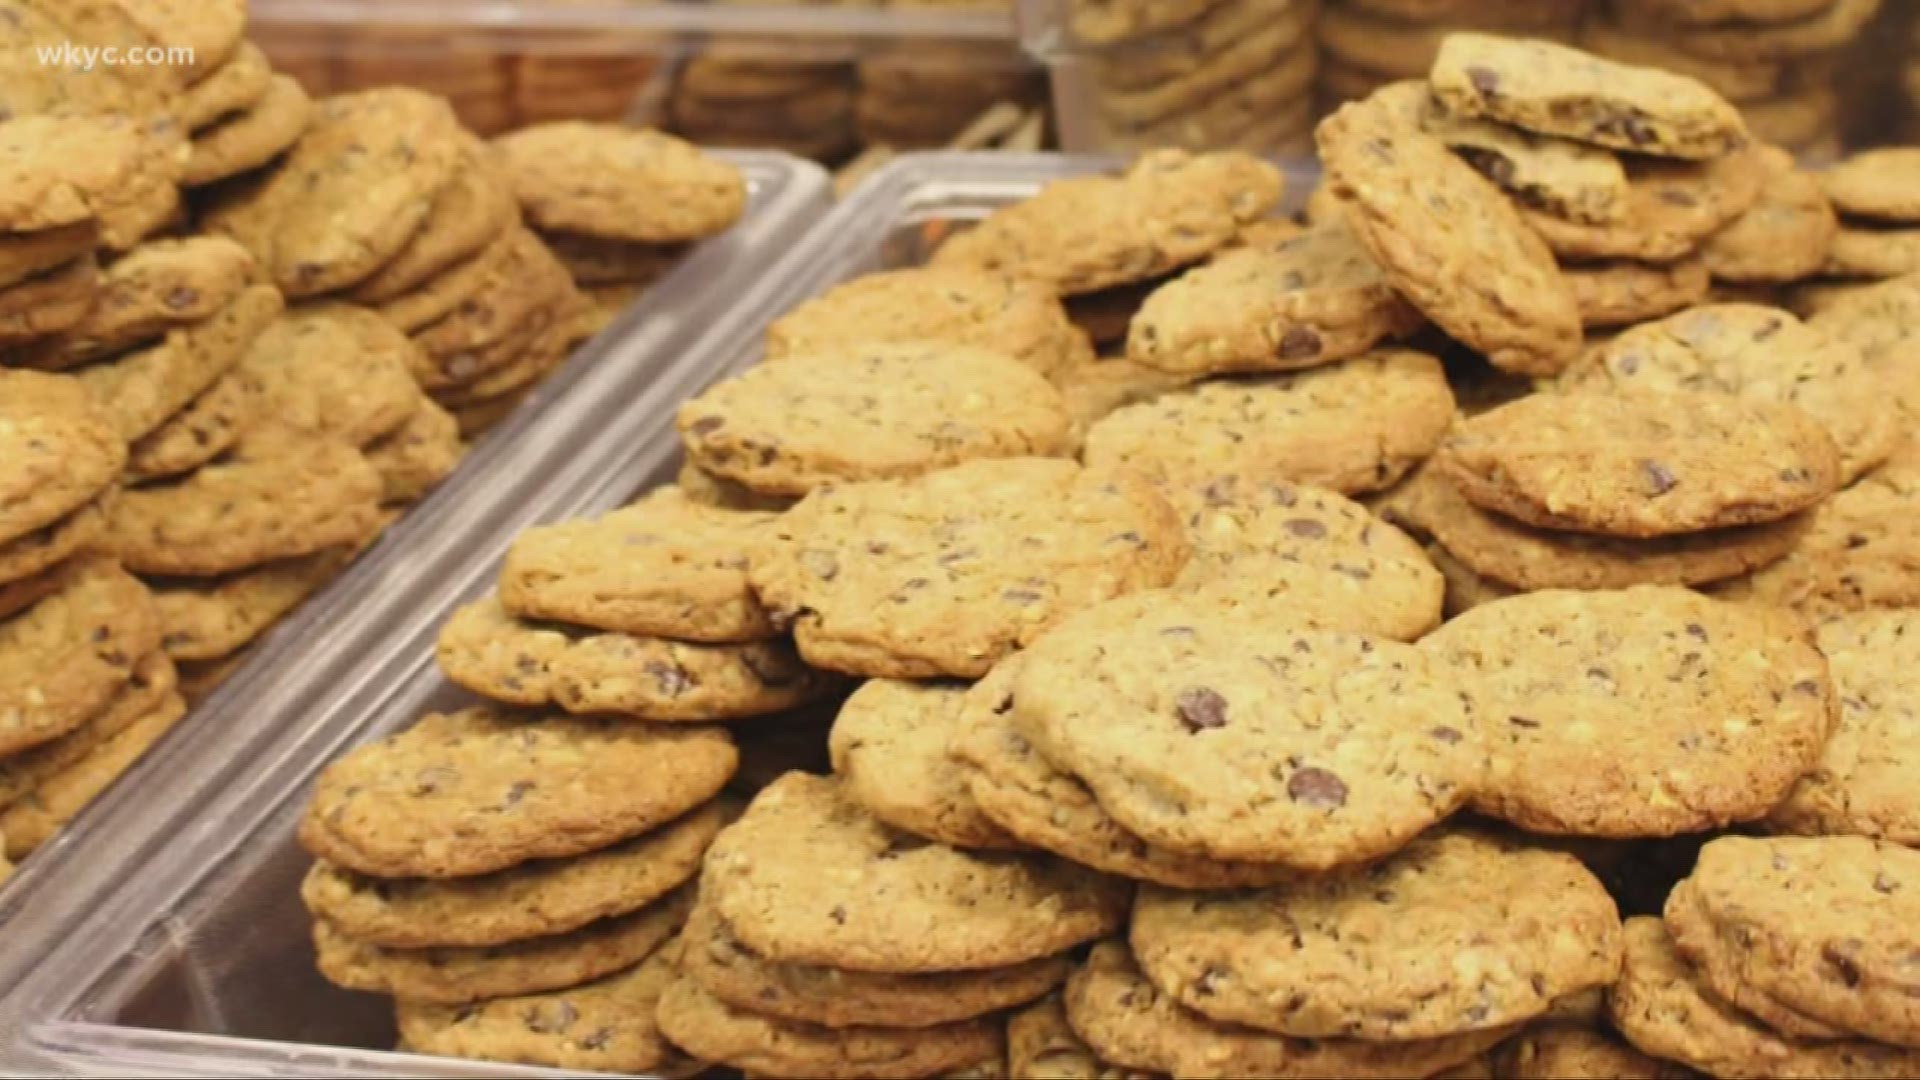 Oct. 23, 2019: Do you love cookies? Researchers say the ingredients in chocolate chip cookies trigger the same addictive response as some drugs.